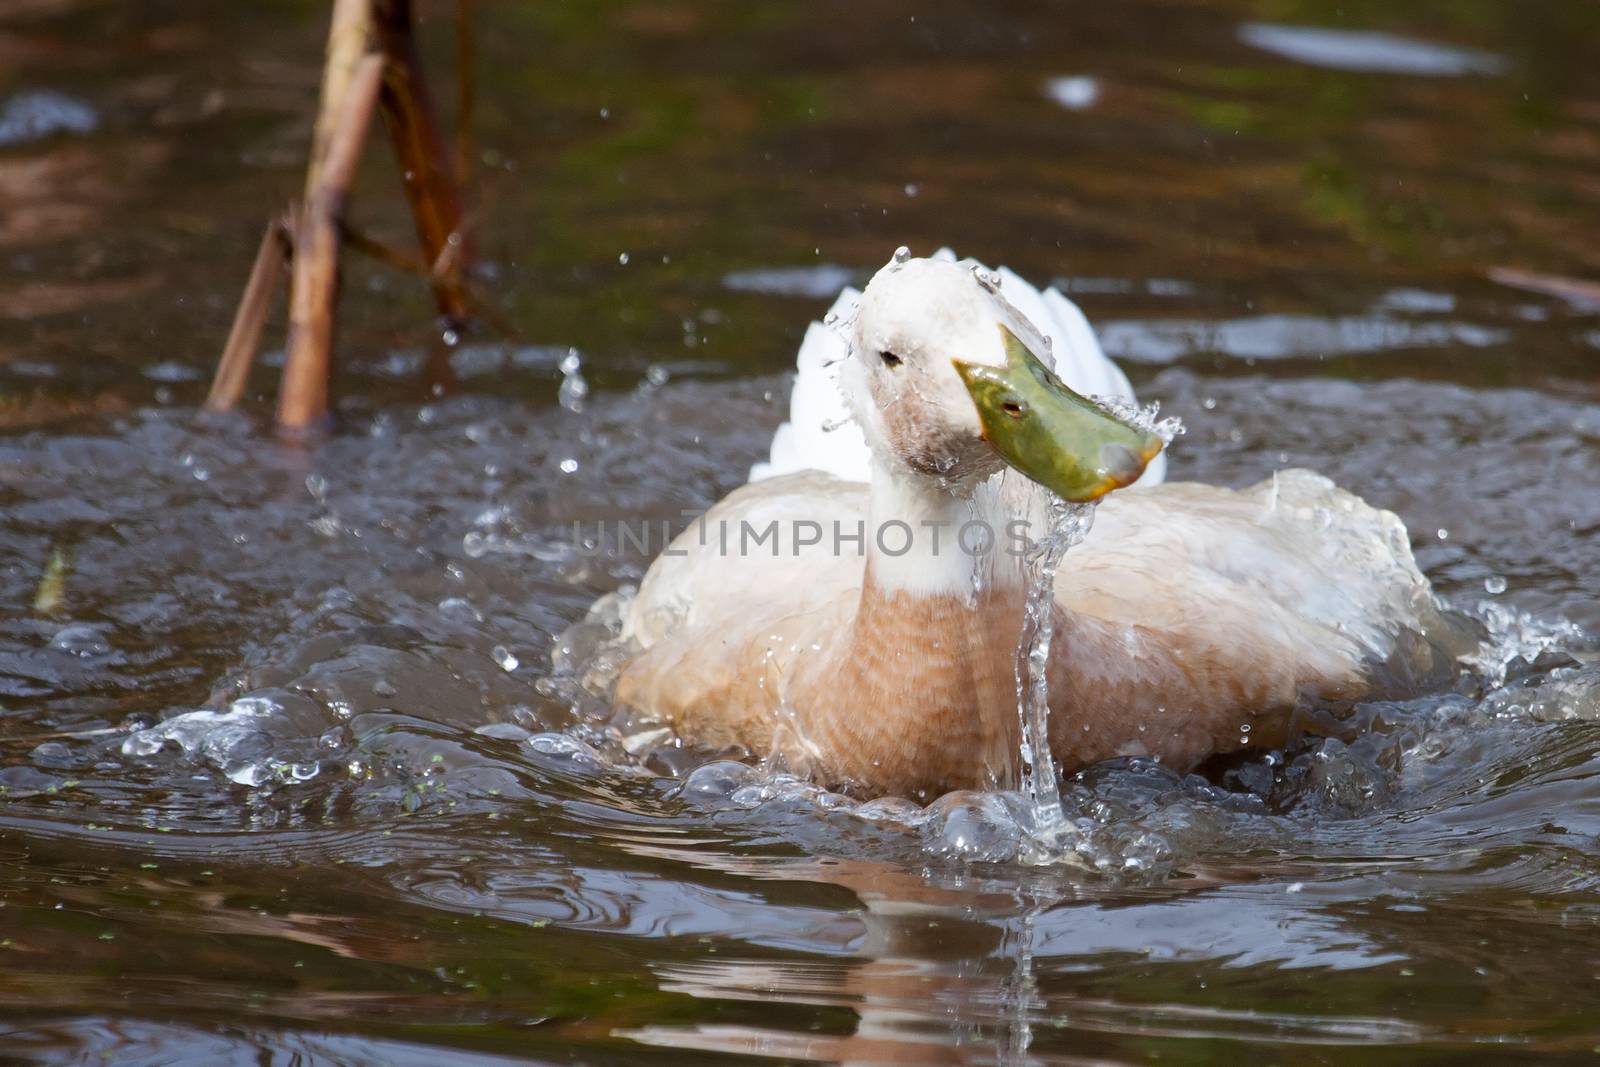 White duck with green bill splashing in a small pond.